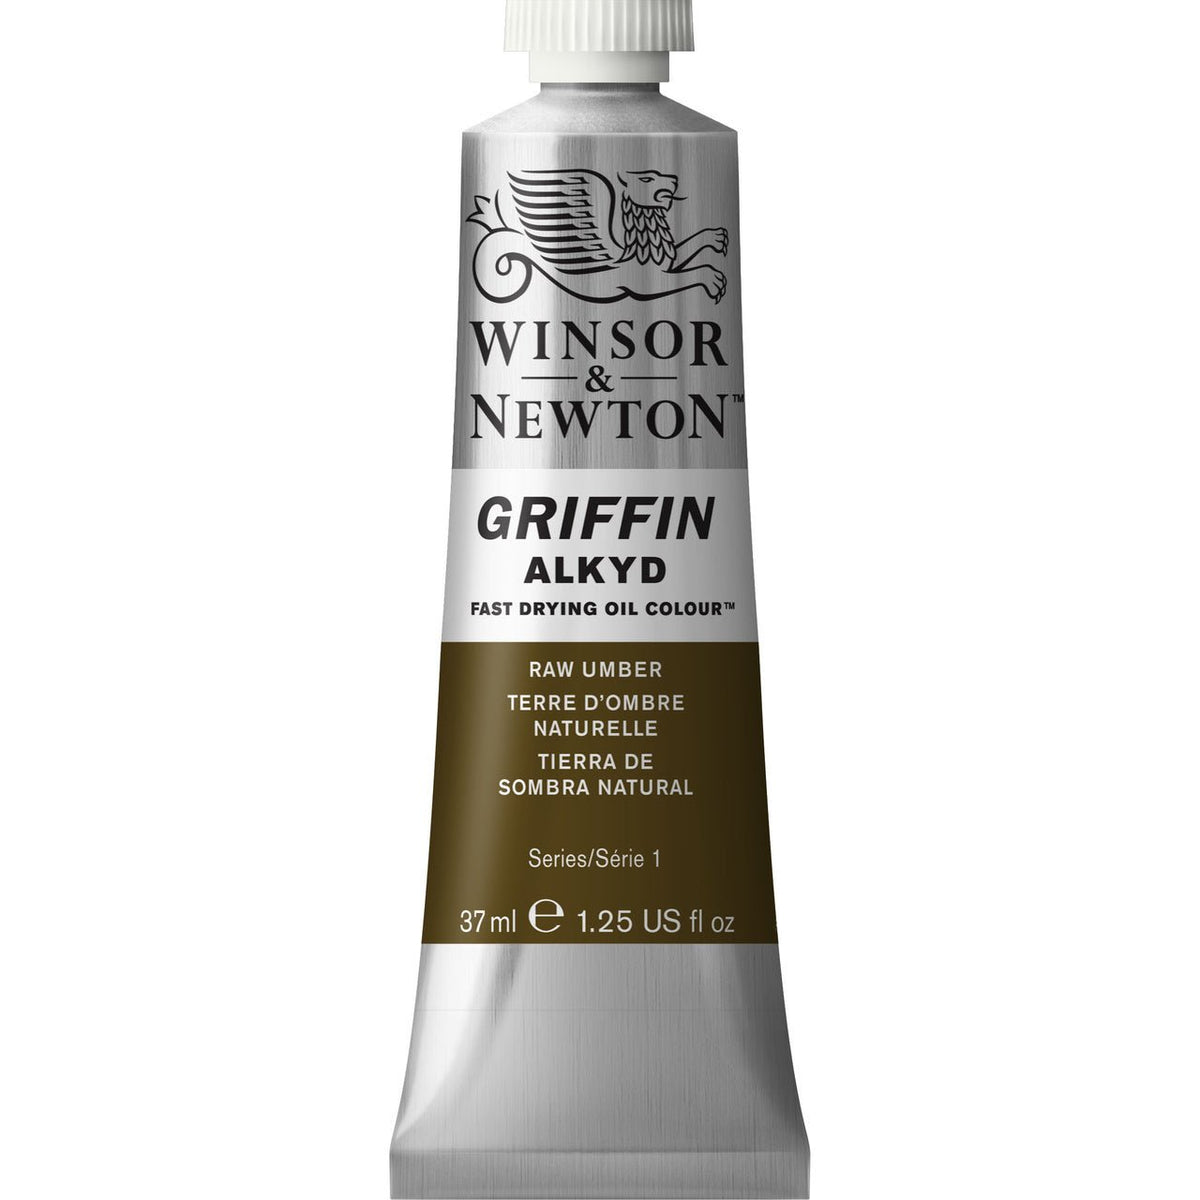 Winsor & Newton Griffin Alkyd 37ml Raw Umber - merriartist.com